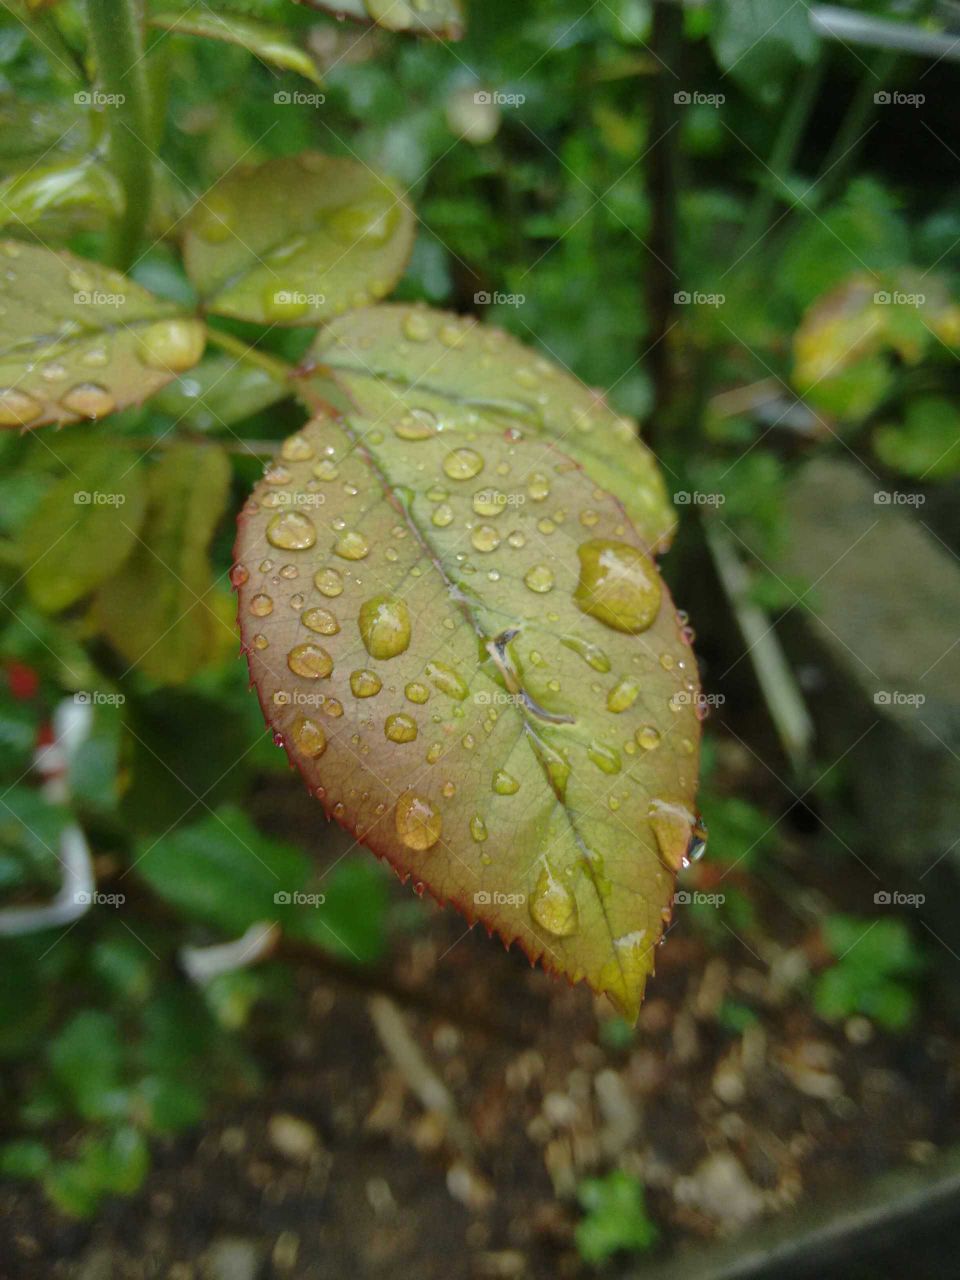 Rose leaves wet after a short summer rain. Photographed in a garden in São Paulo, Brazil.